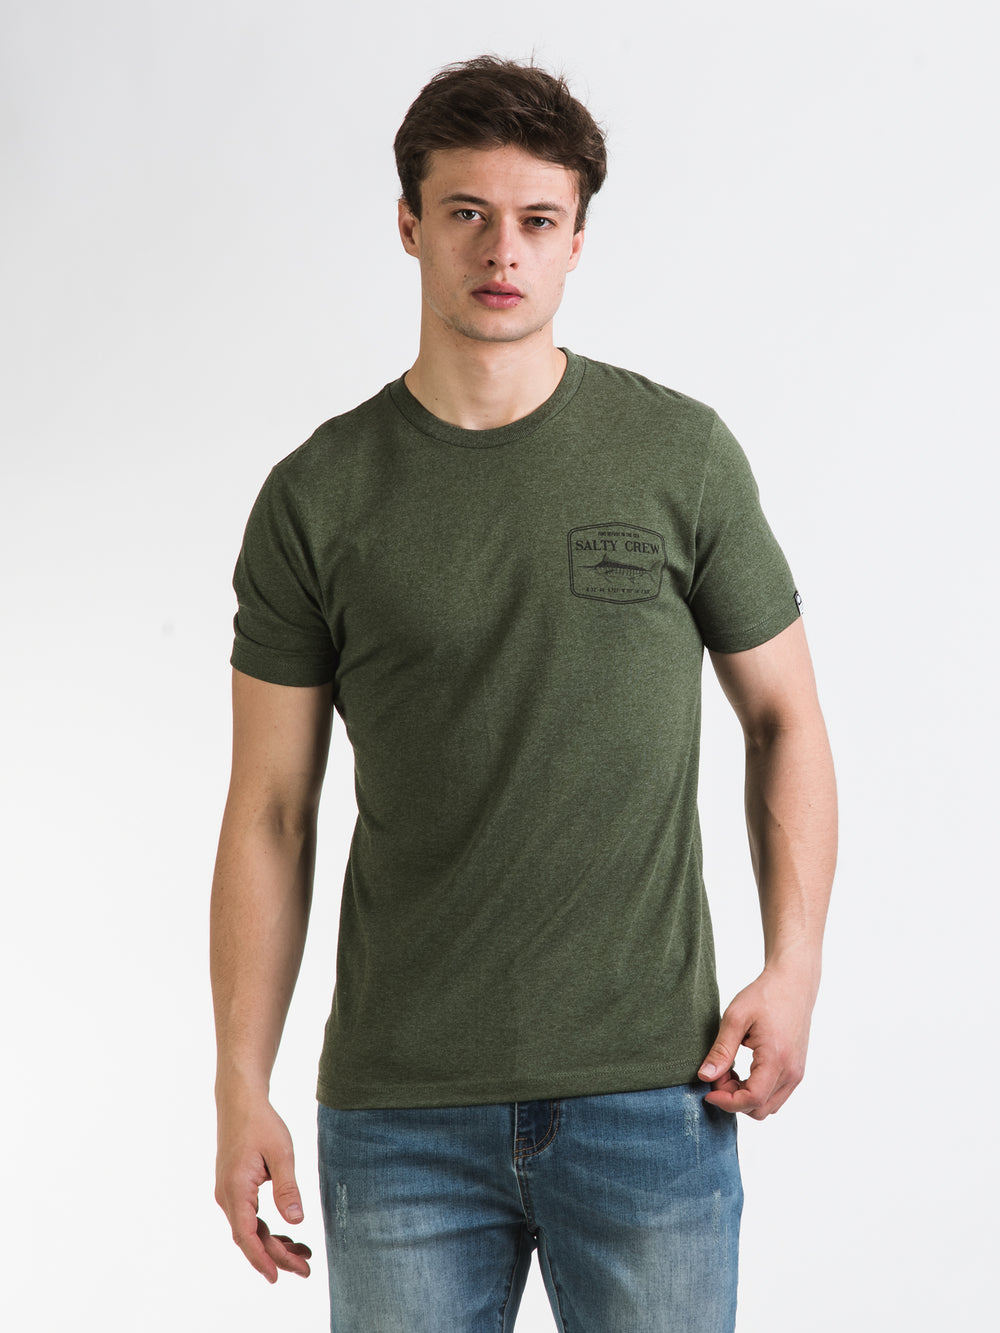 SALTY CREW STEALTH STANDARD T-SHIRT - CLEARANCE